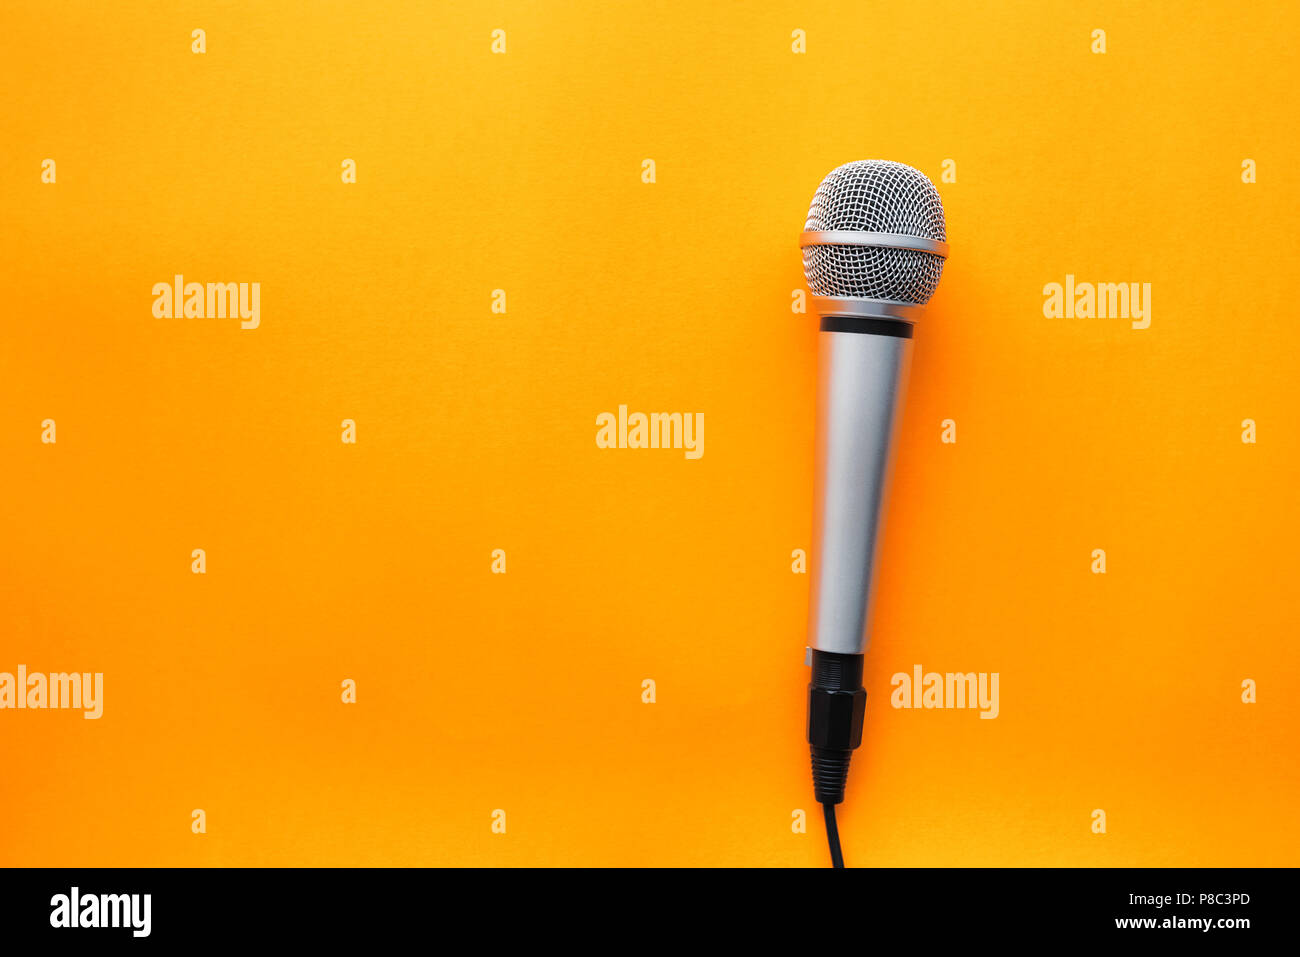 Microphone on yellow background with copy space Stock Photo